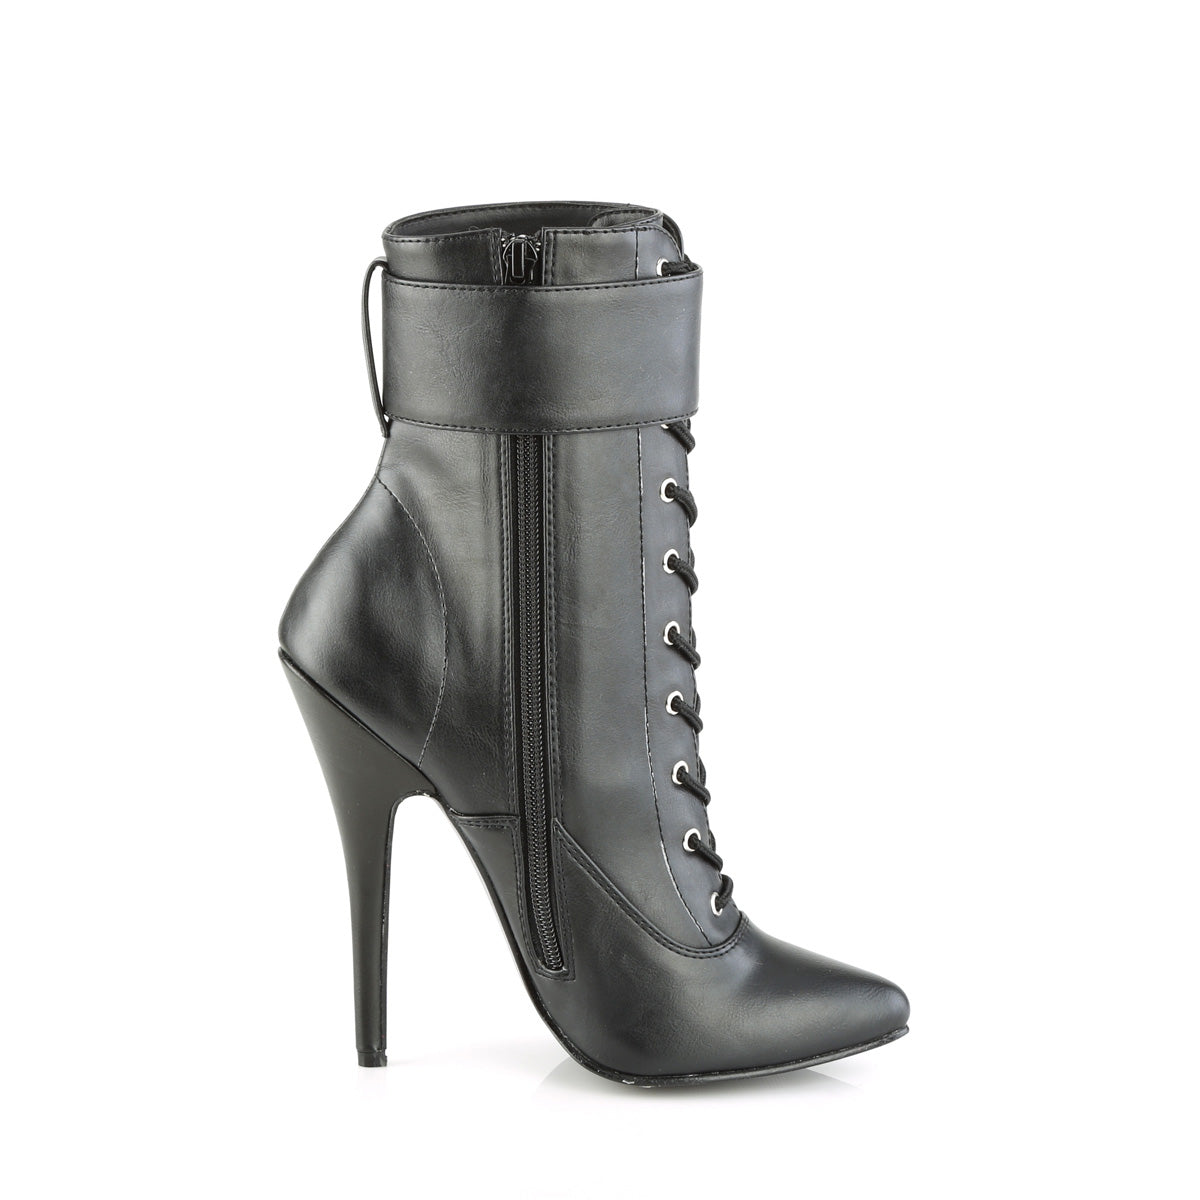 Devious Womens Ankle Boots DOMINA-1023 Blk Faux Leather